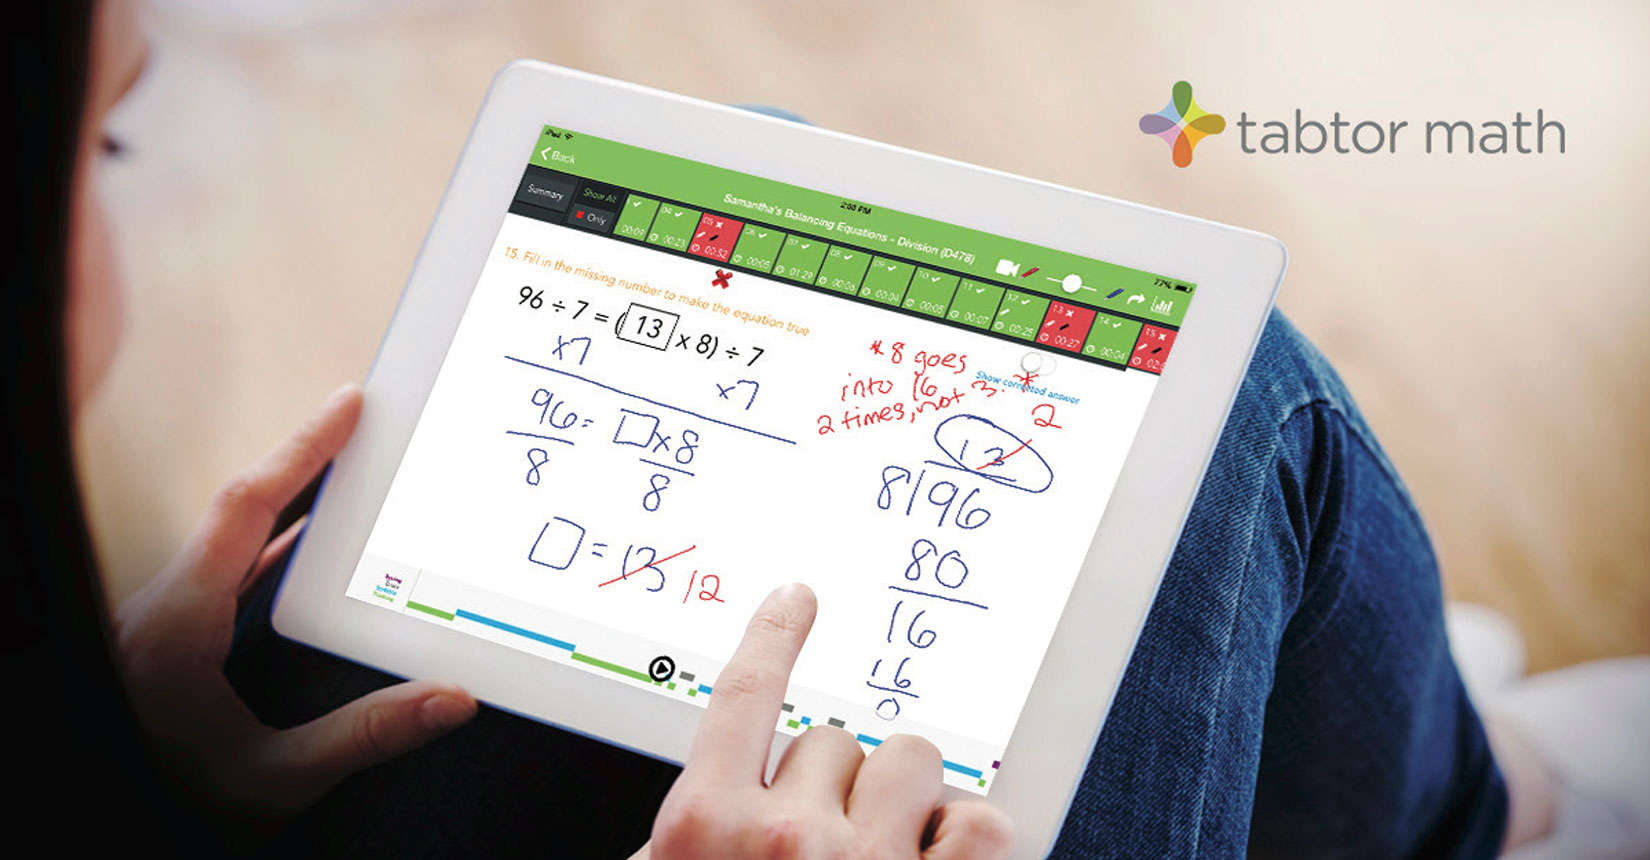 The Tabtor Math app doesn't leave you alone with your iPad. A personalized tutor is assigned to each student.